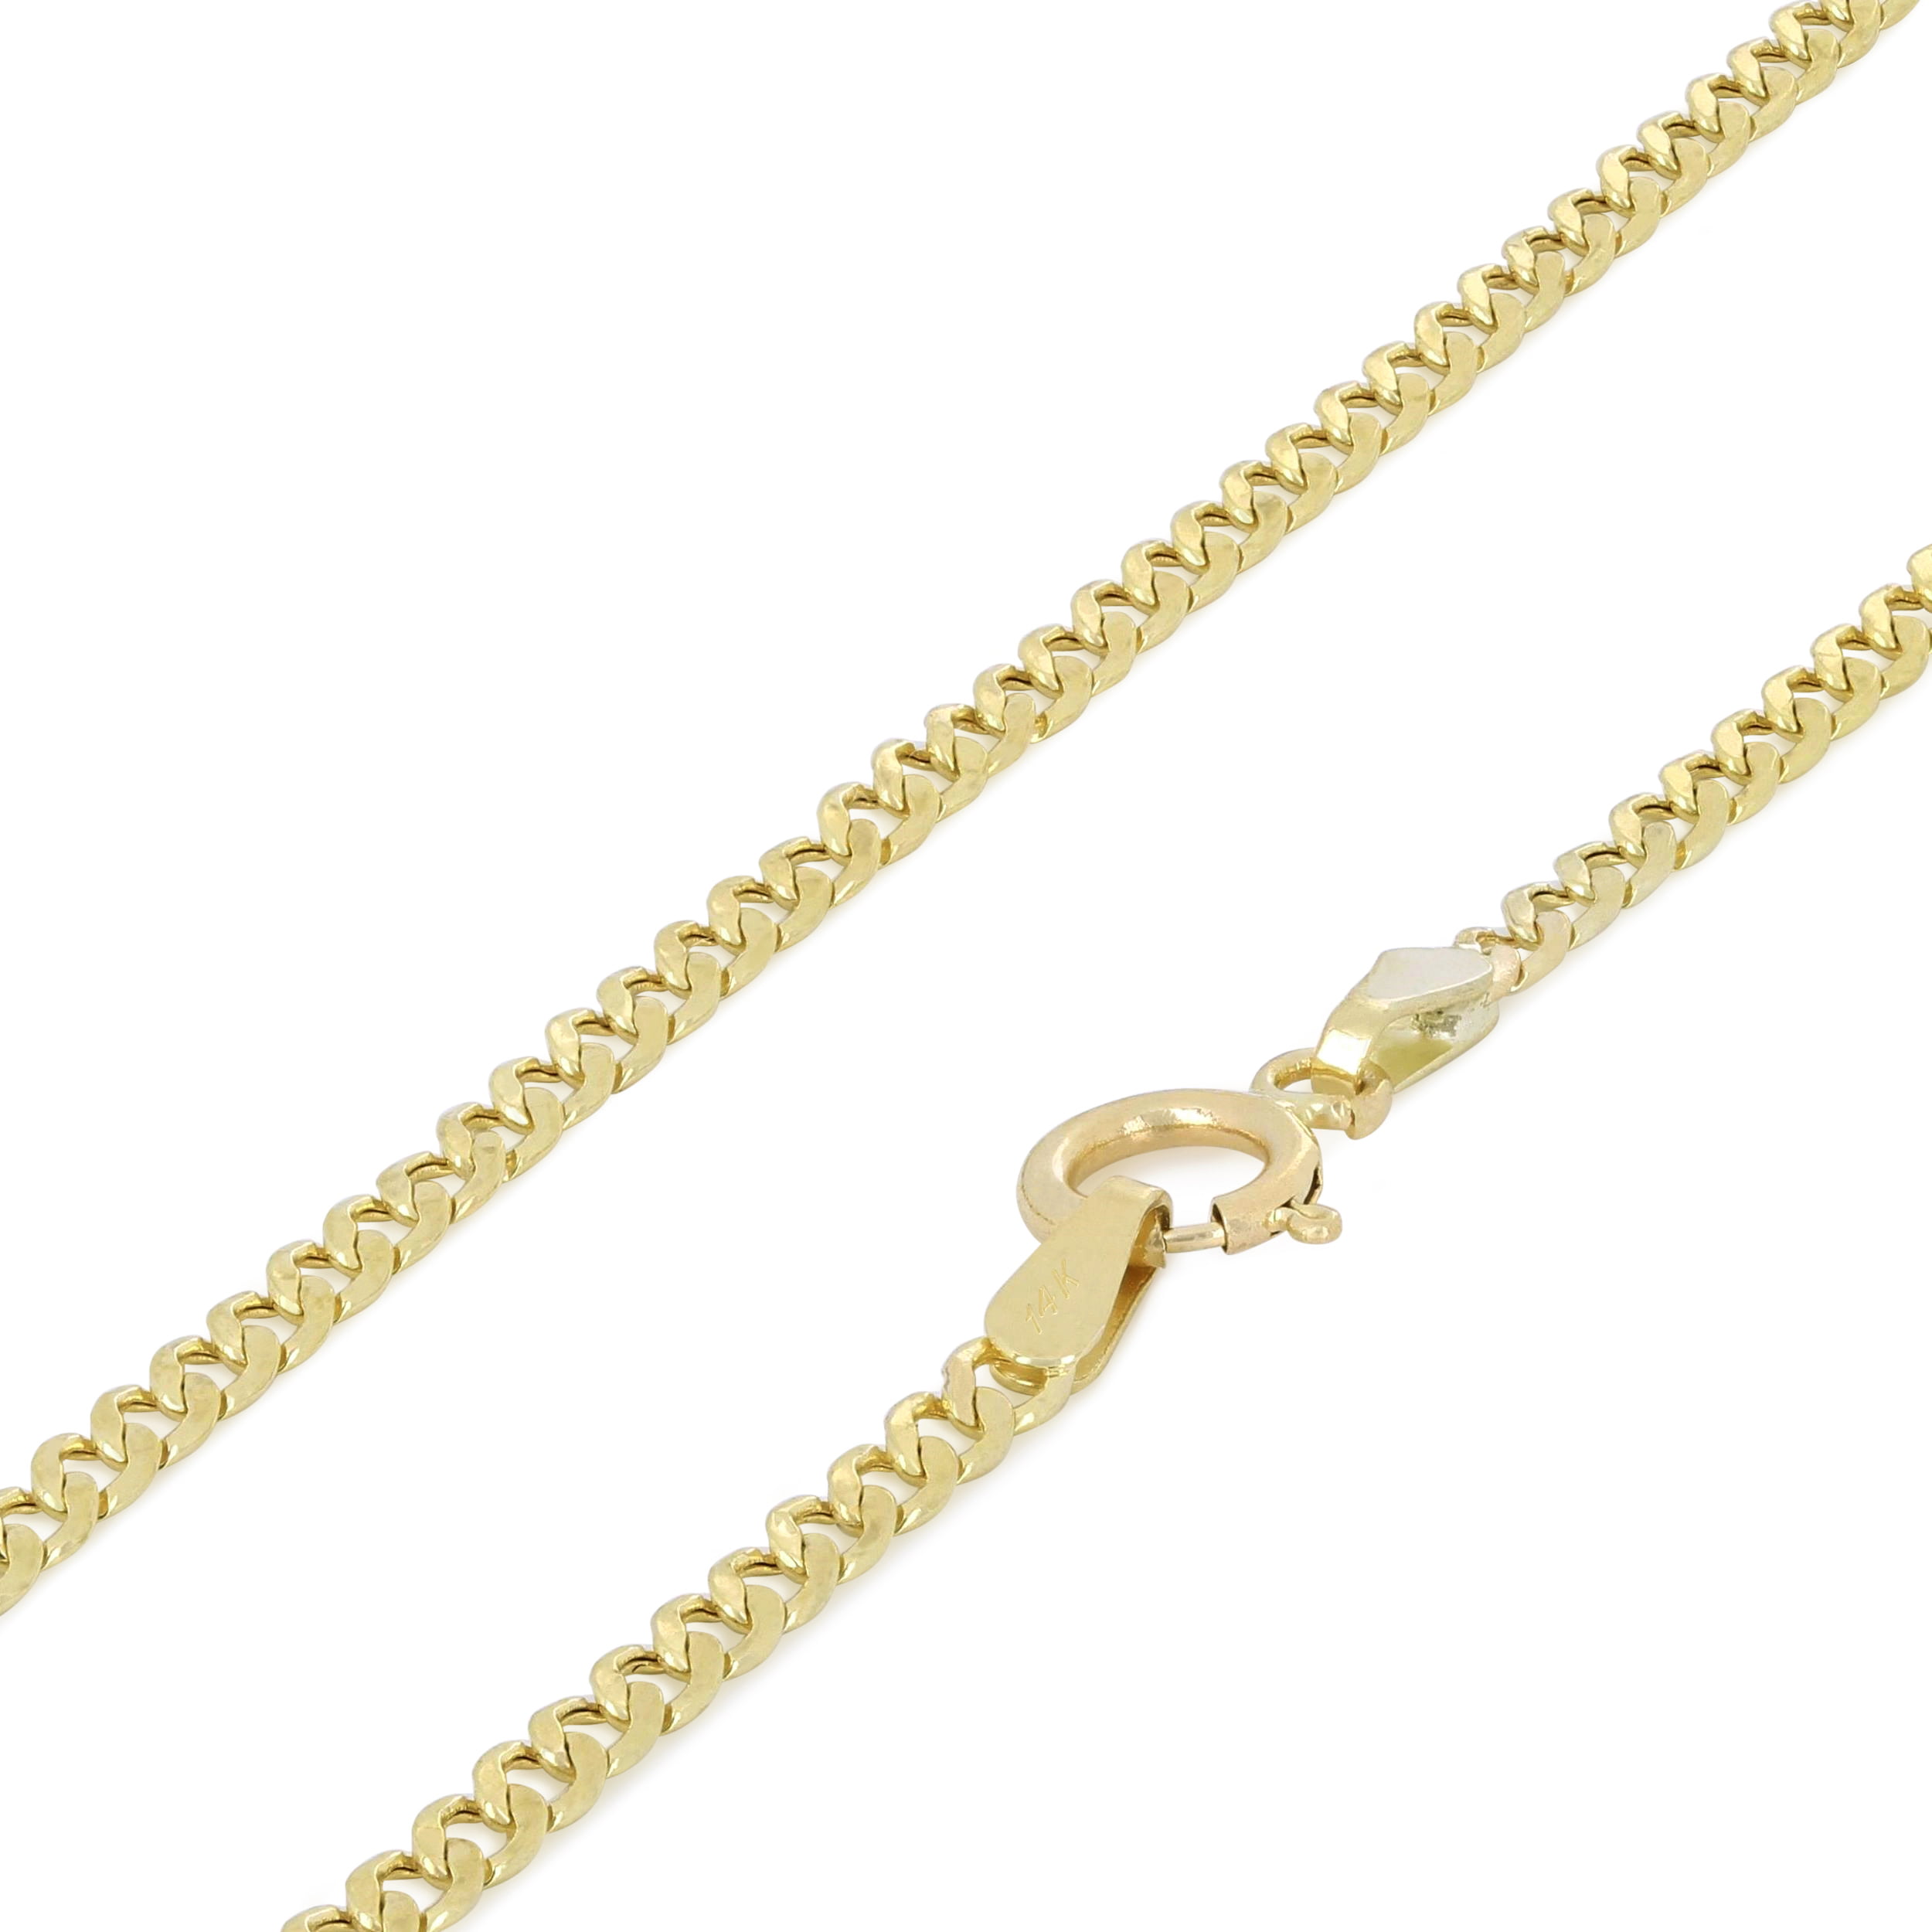 Sonia Jewels 14k Yellow Gold Hollow Curb Chain Necklace With Lobster Claw Clasp